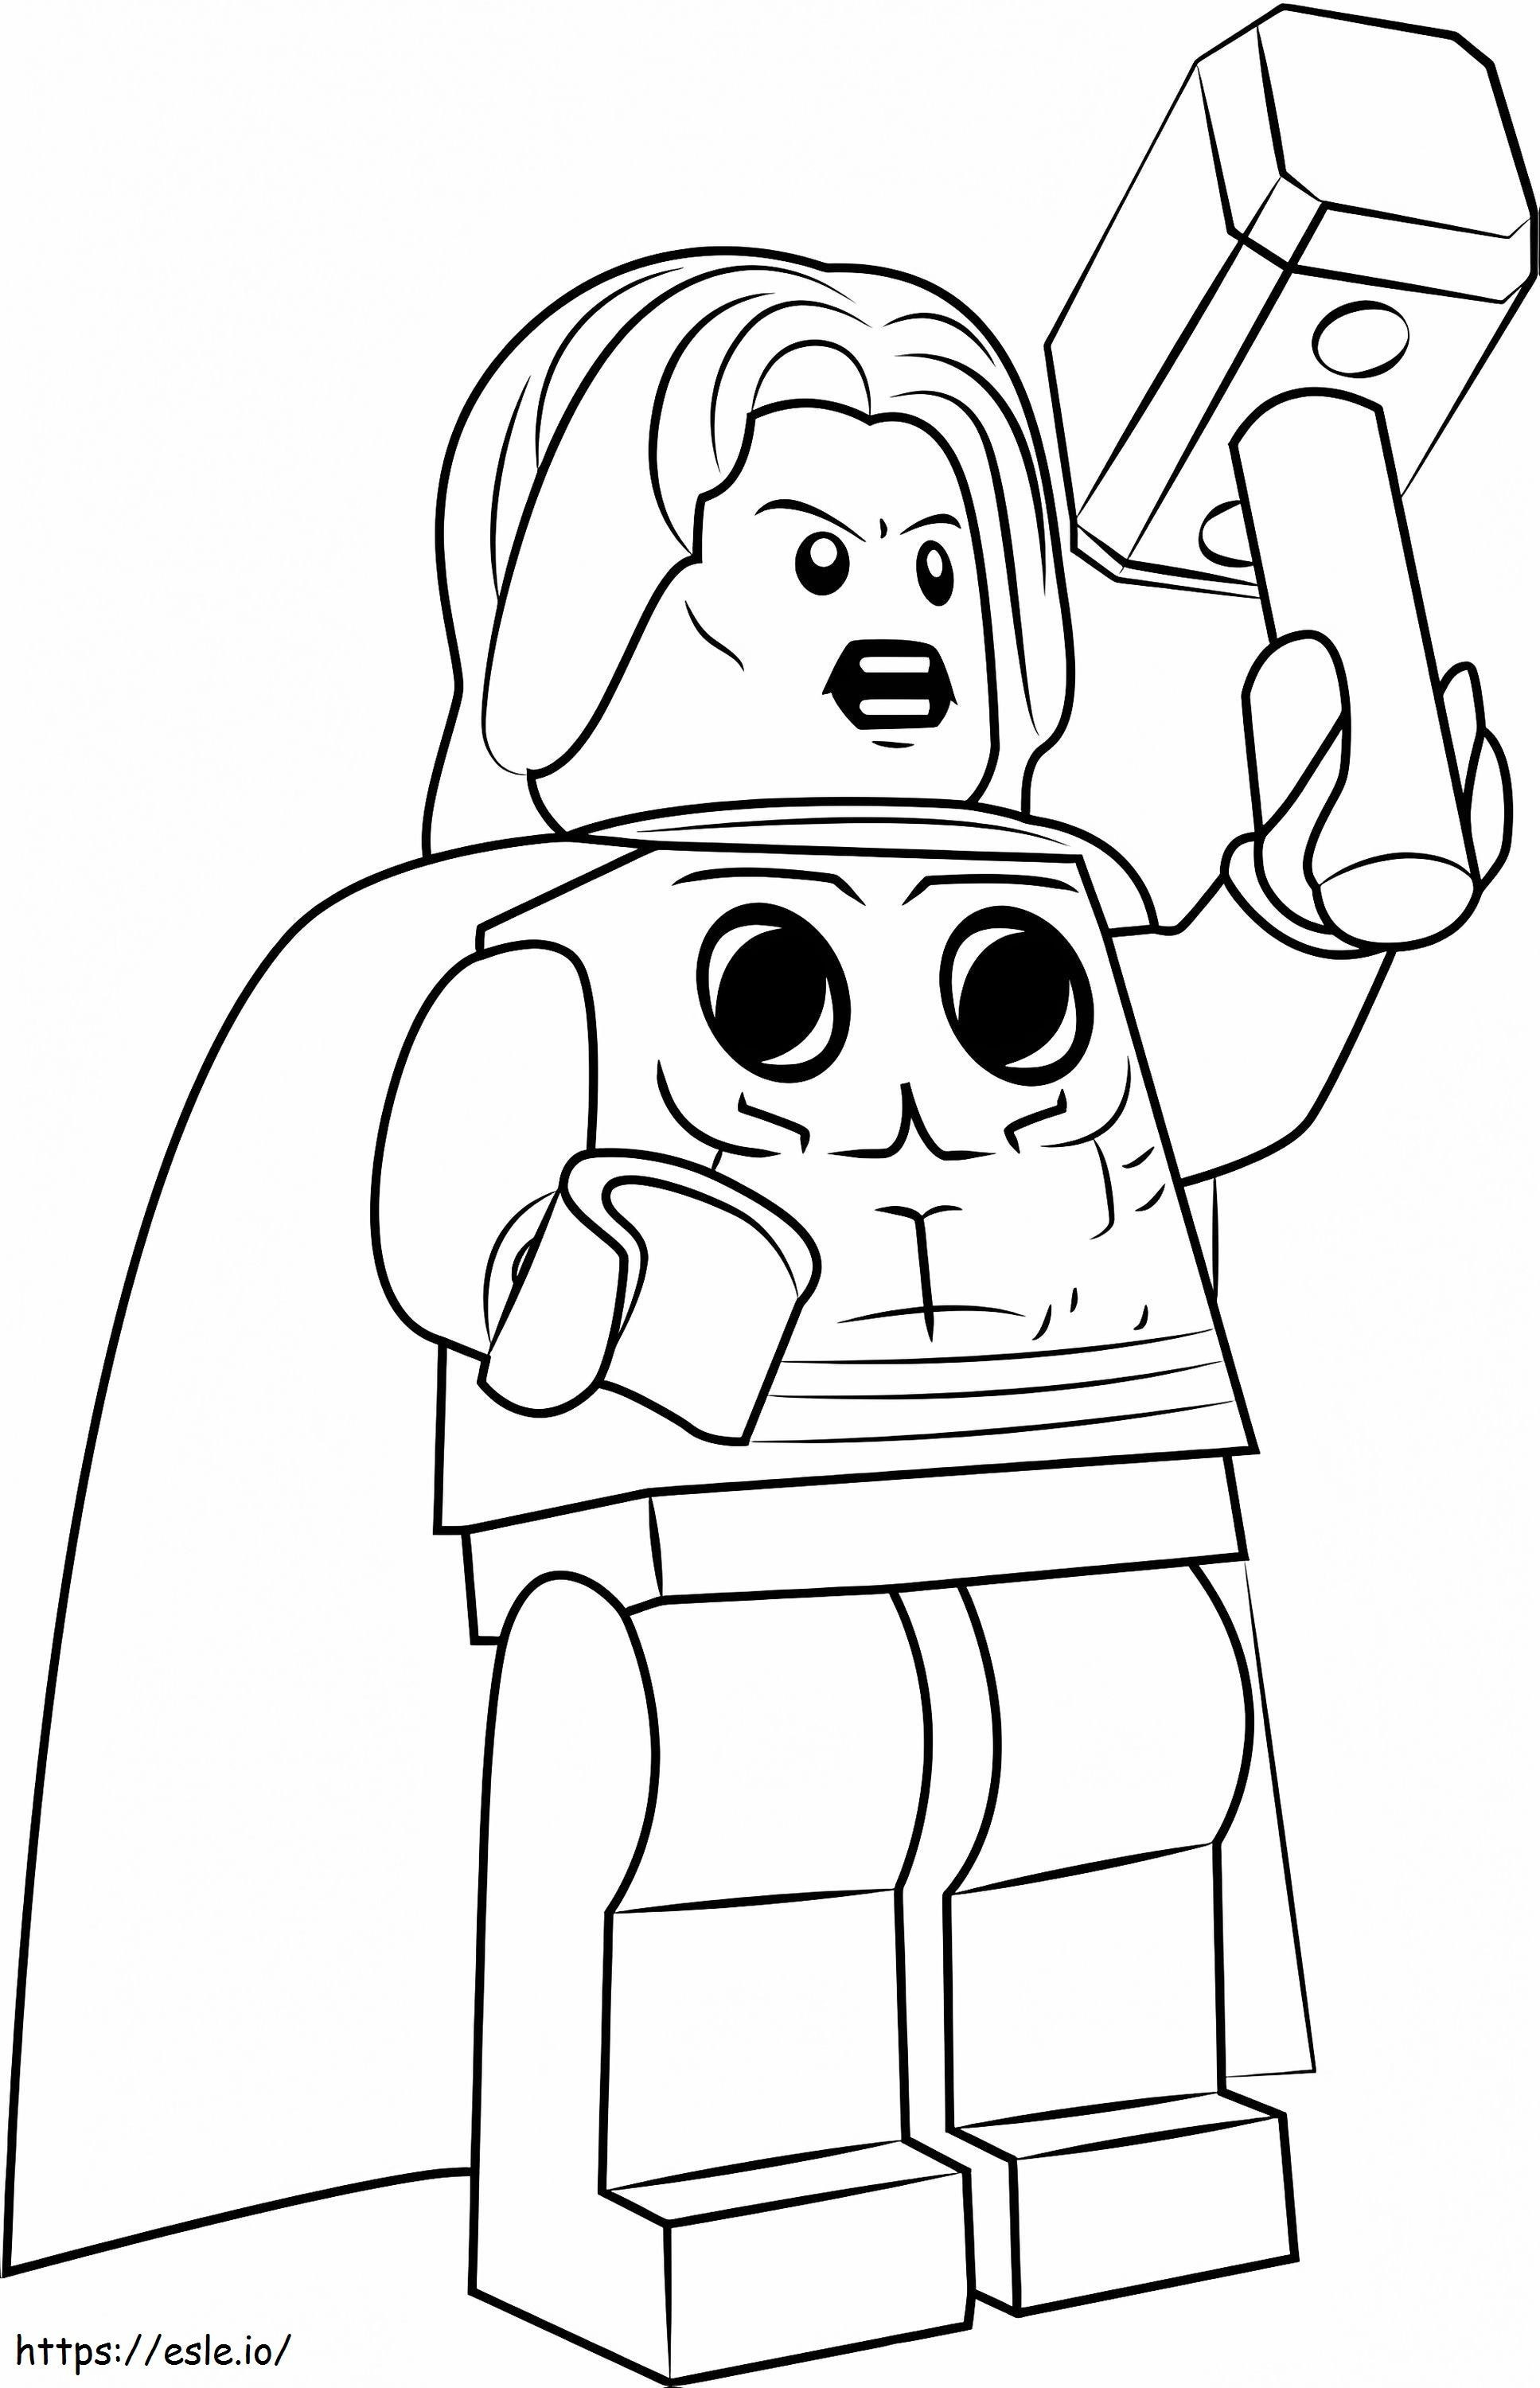 1530329794 Lego Thor1 coloring page